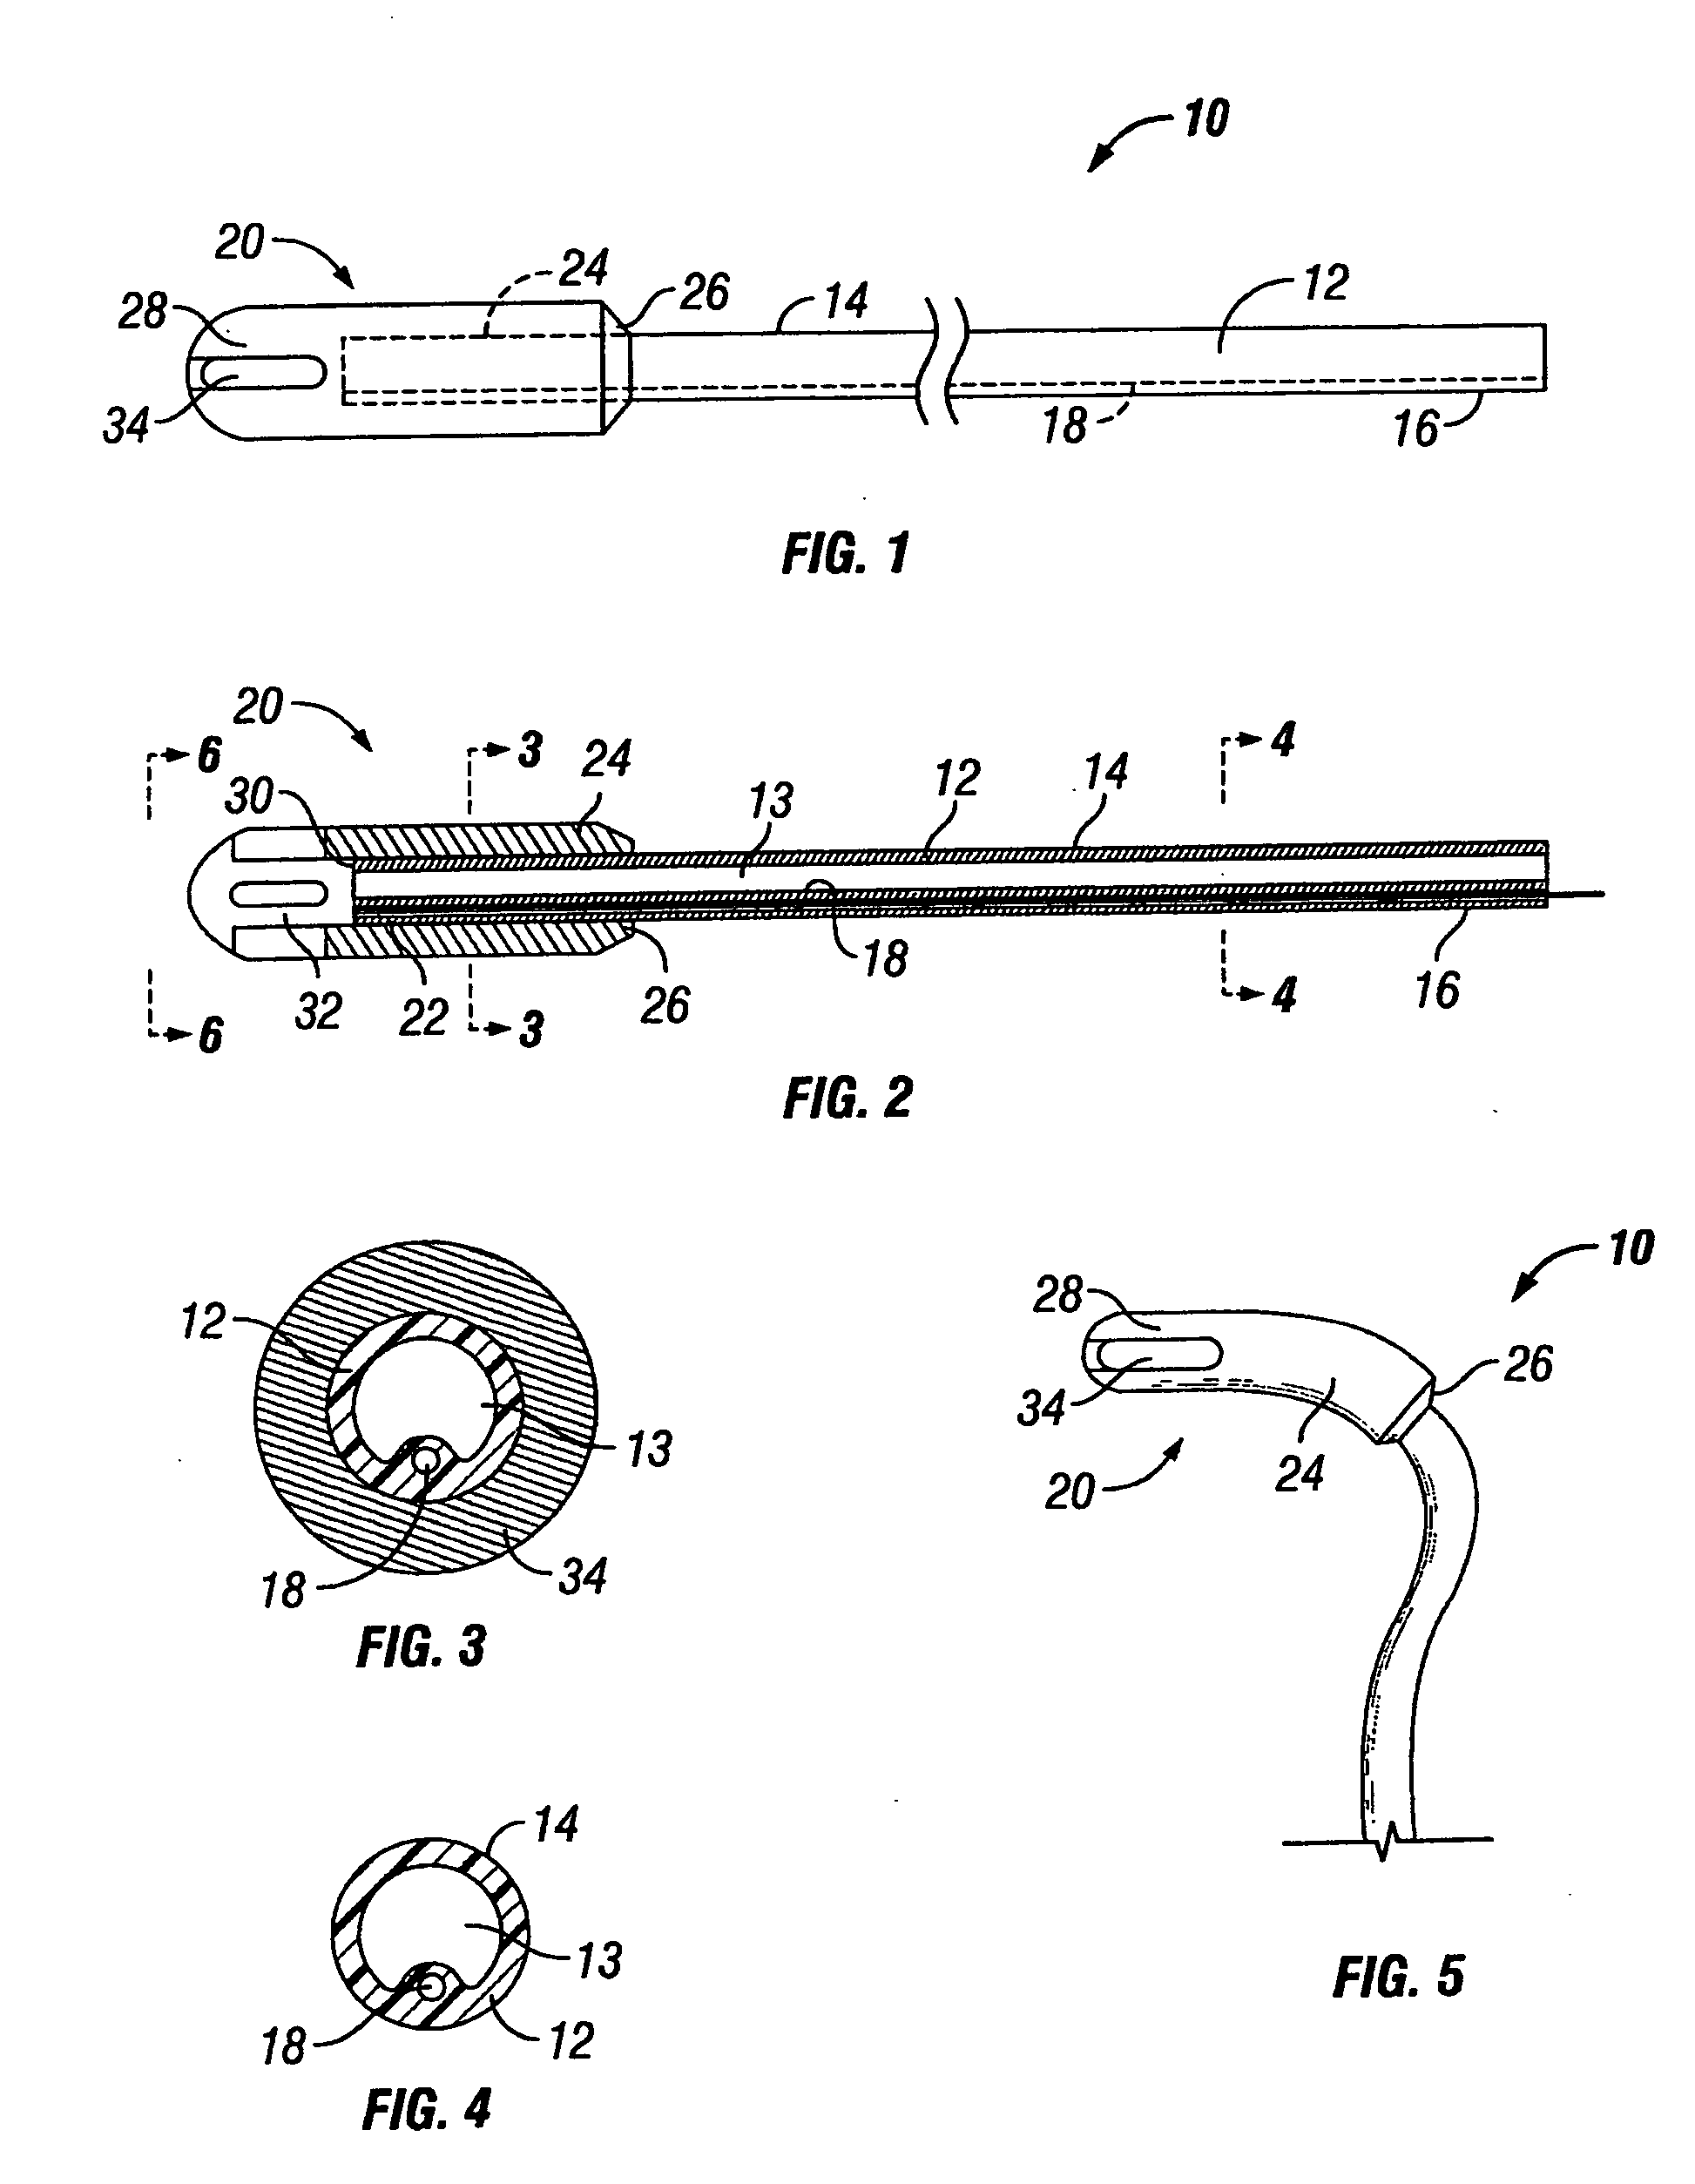 Aspirator having a cushioned and aspiration controlling tip